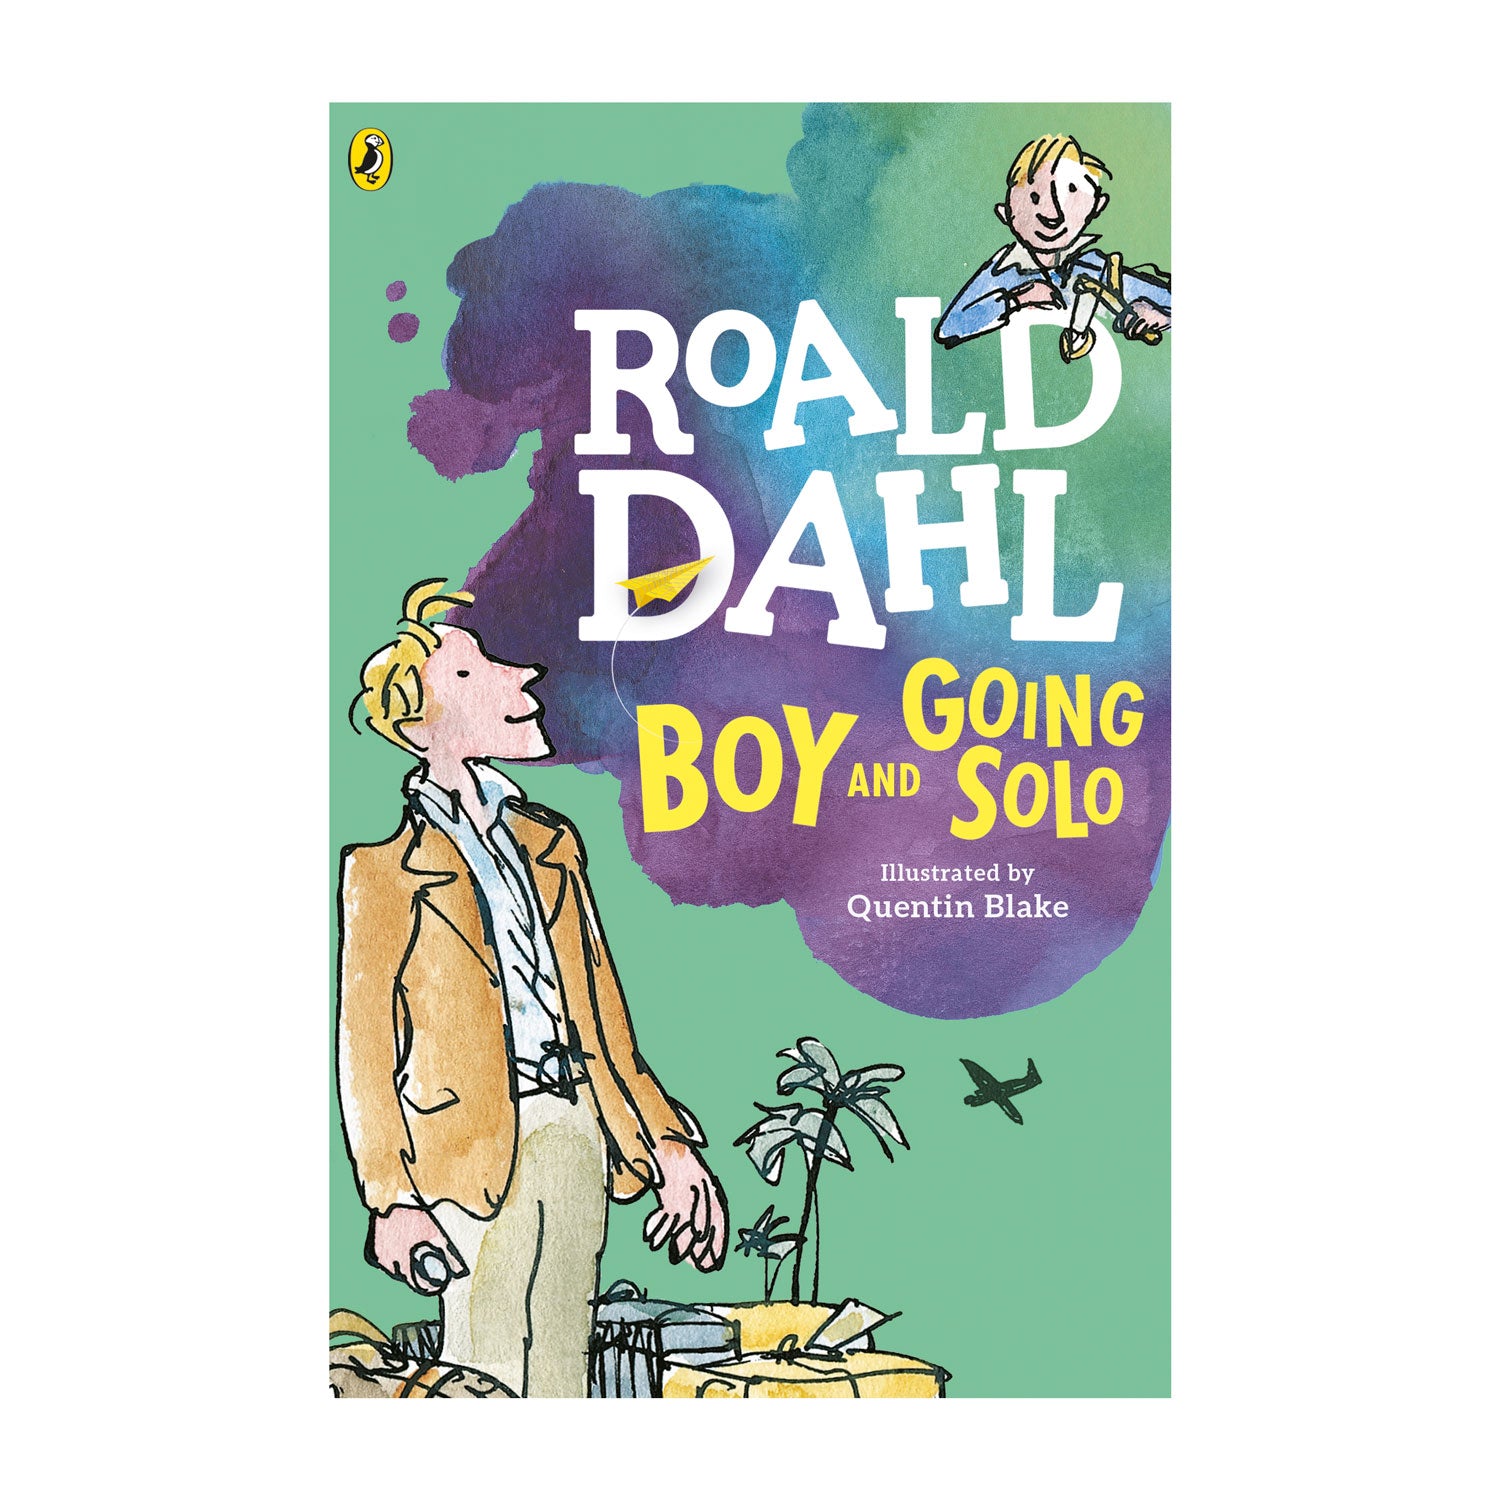 Boy　Going　Online　Dahl　and　Paperback　Solo　Museum　–　The　Roald　Shop